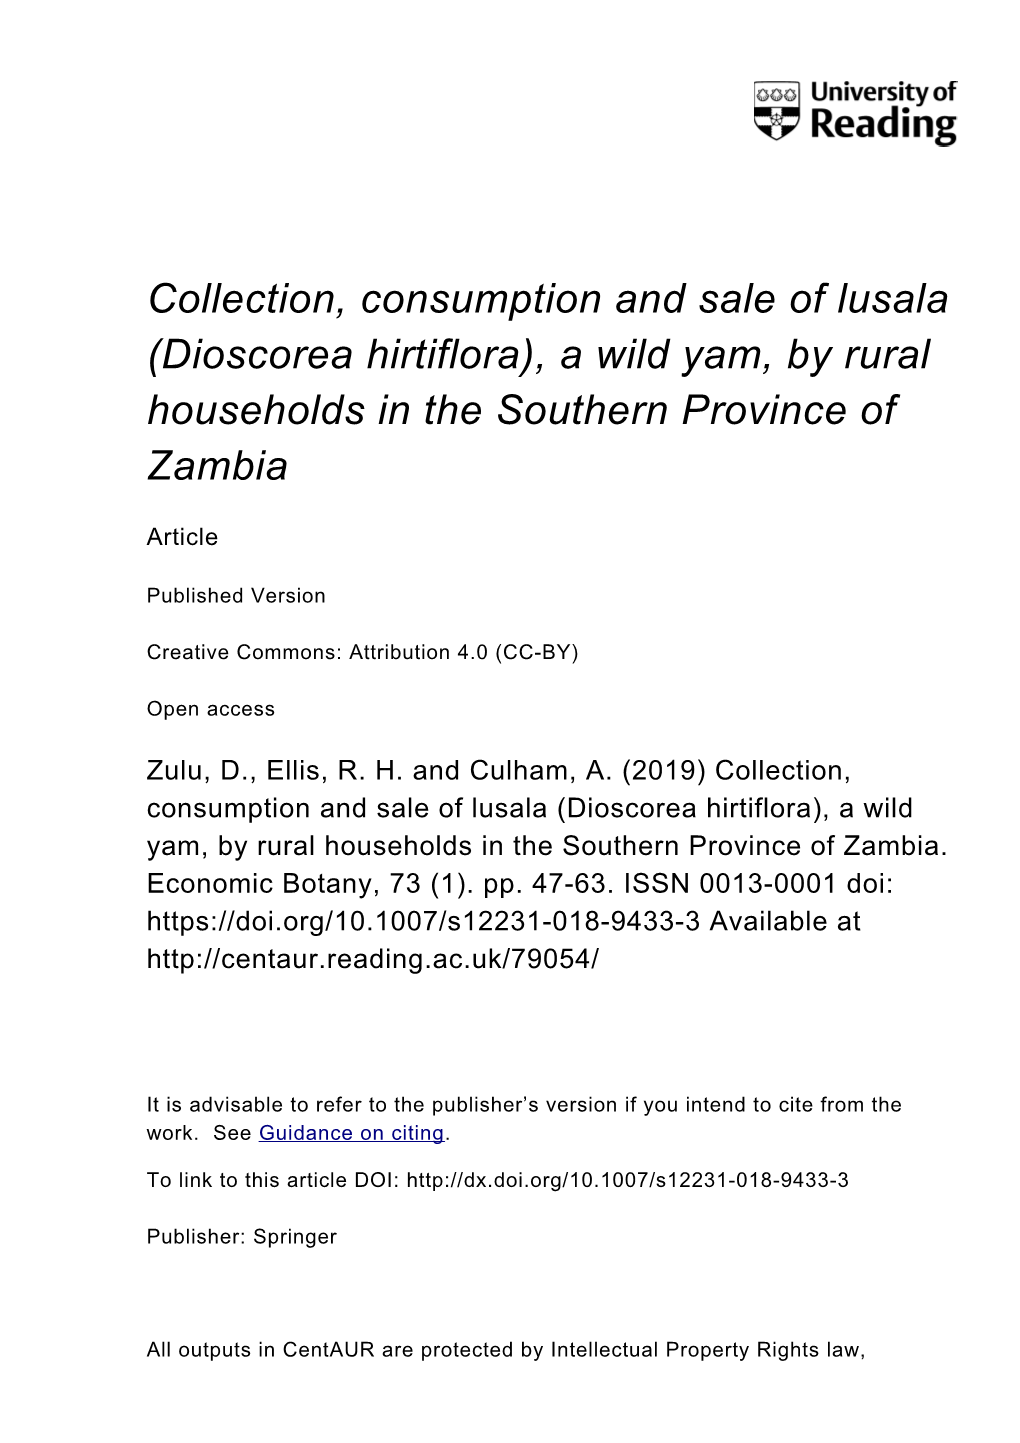 Collection, Consumption, and Sale of Lusala (Dioscorea Hirtiflora)—A Wild Yam—By Rural Households in Southern Province, Zamb